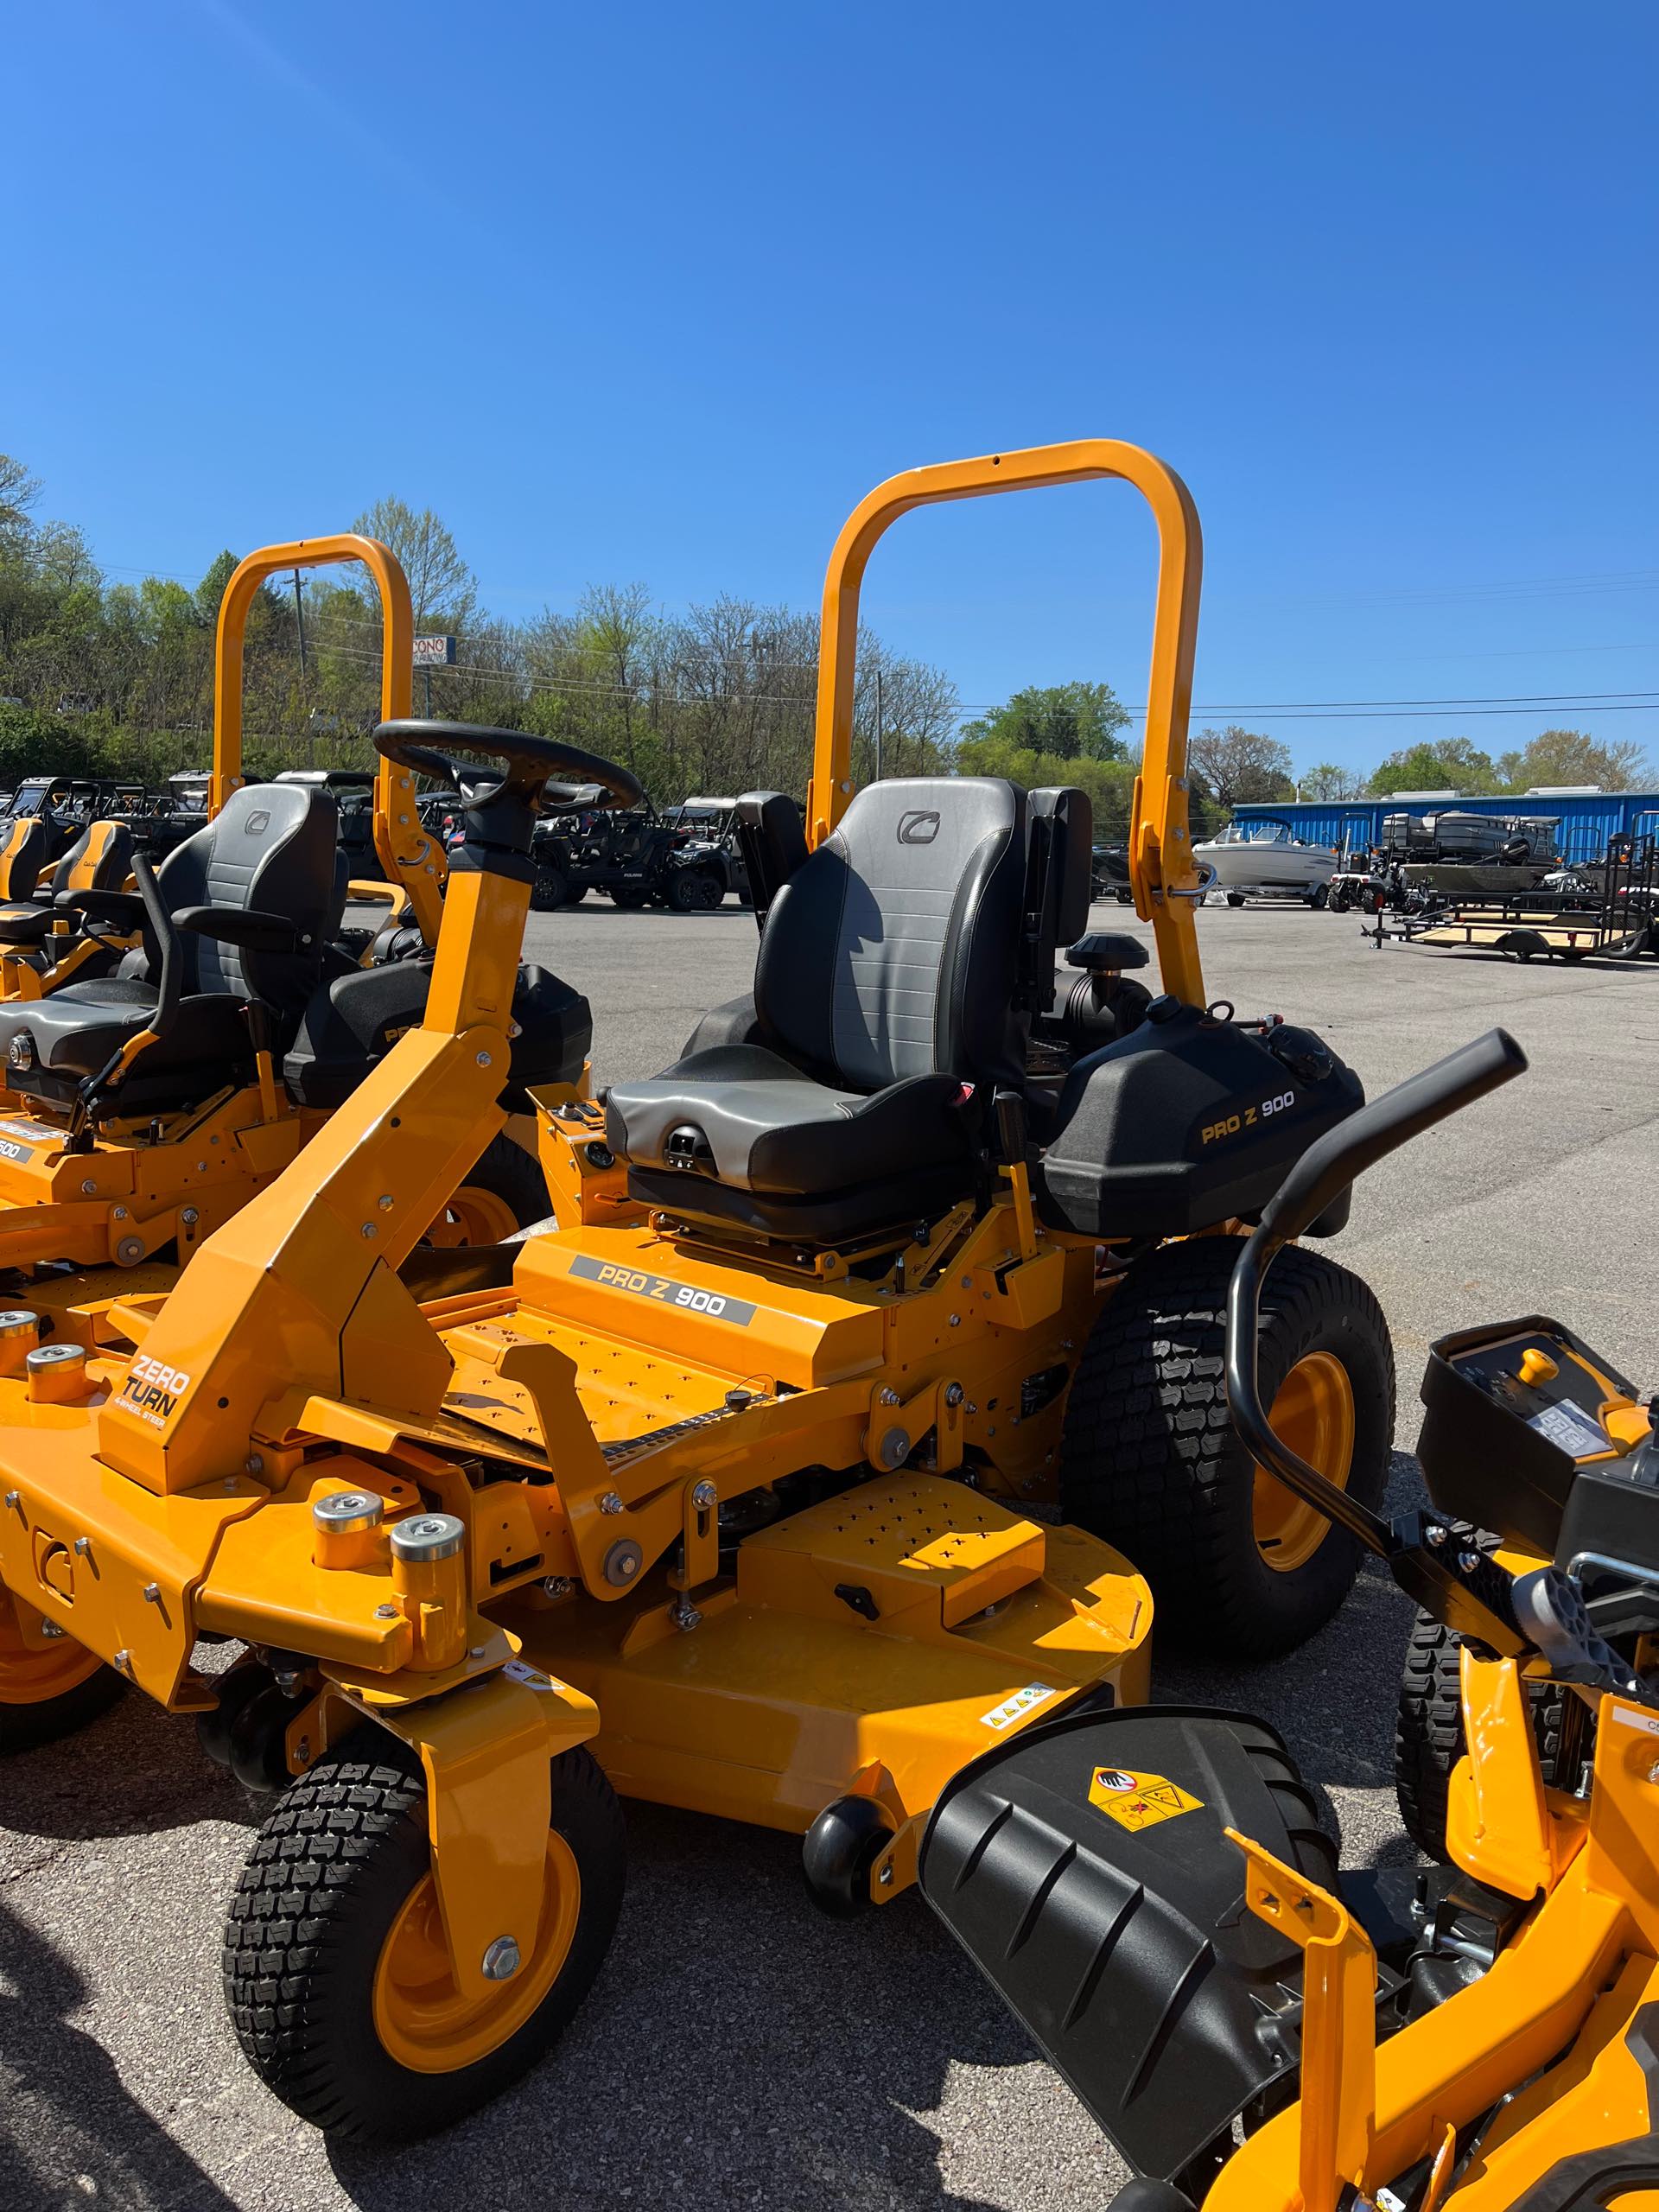 2022 Cub Cadet Commercial Zero Turn Mowers PRO Z 960 S KW at Knoxville Powersports